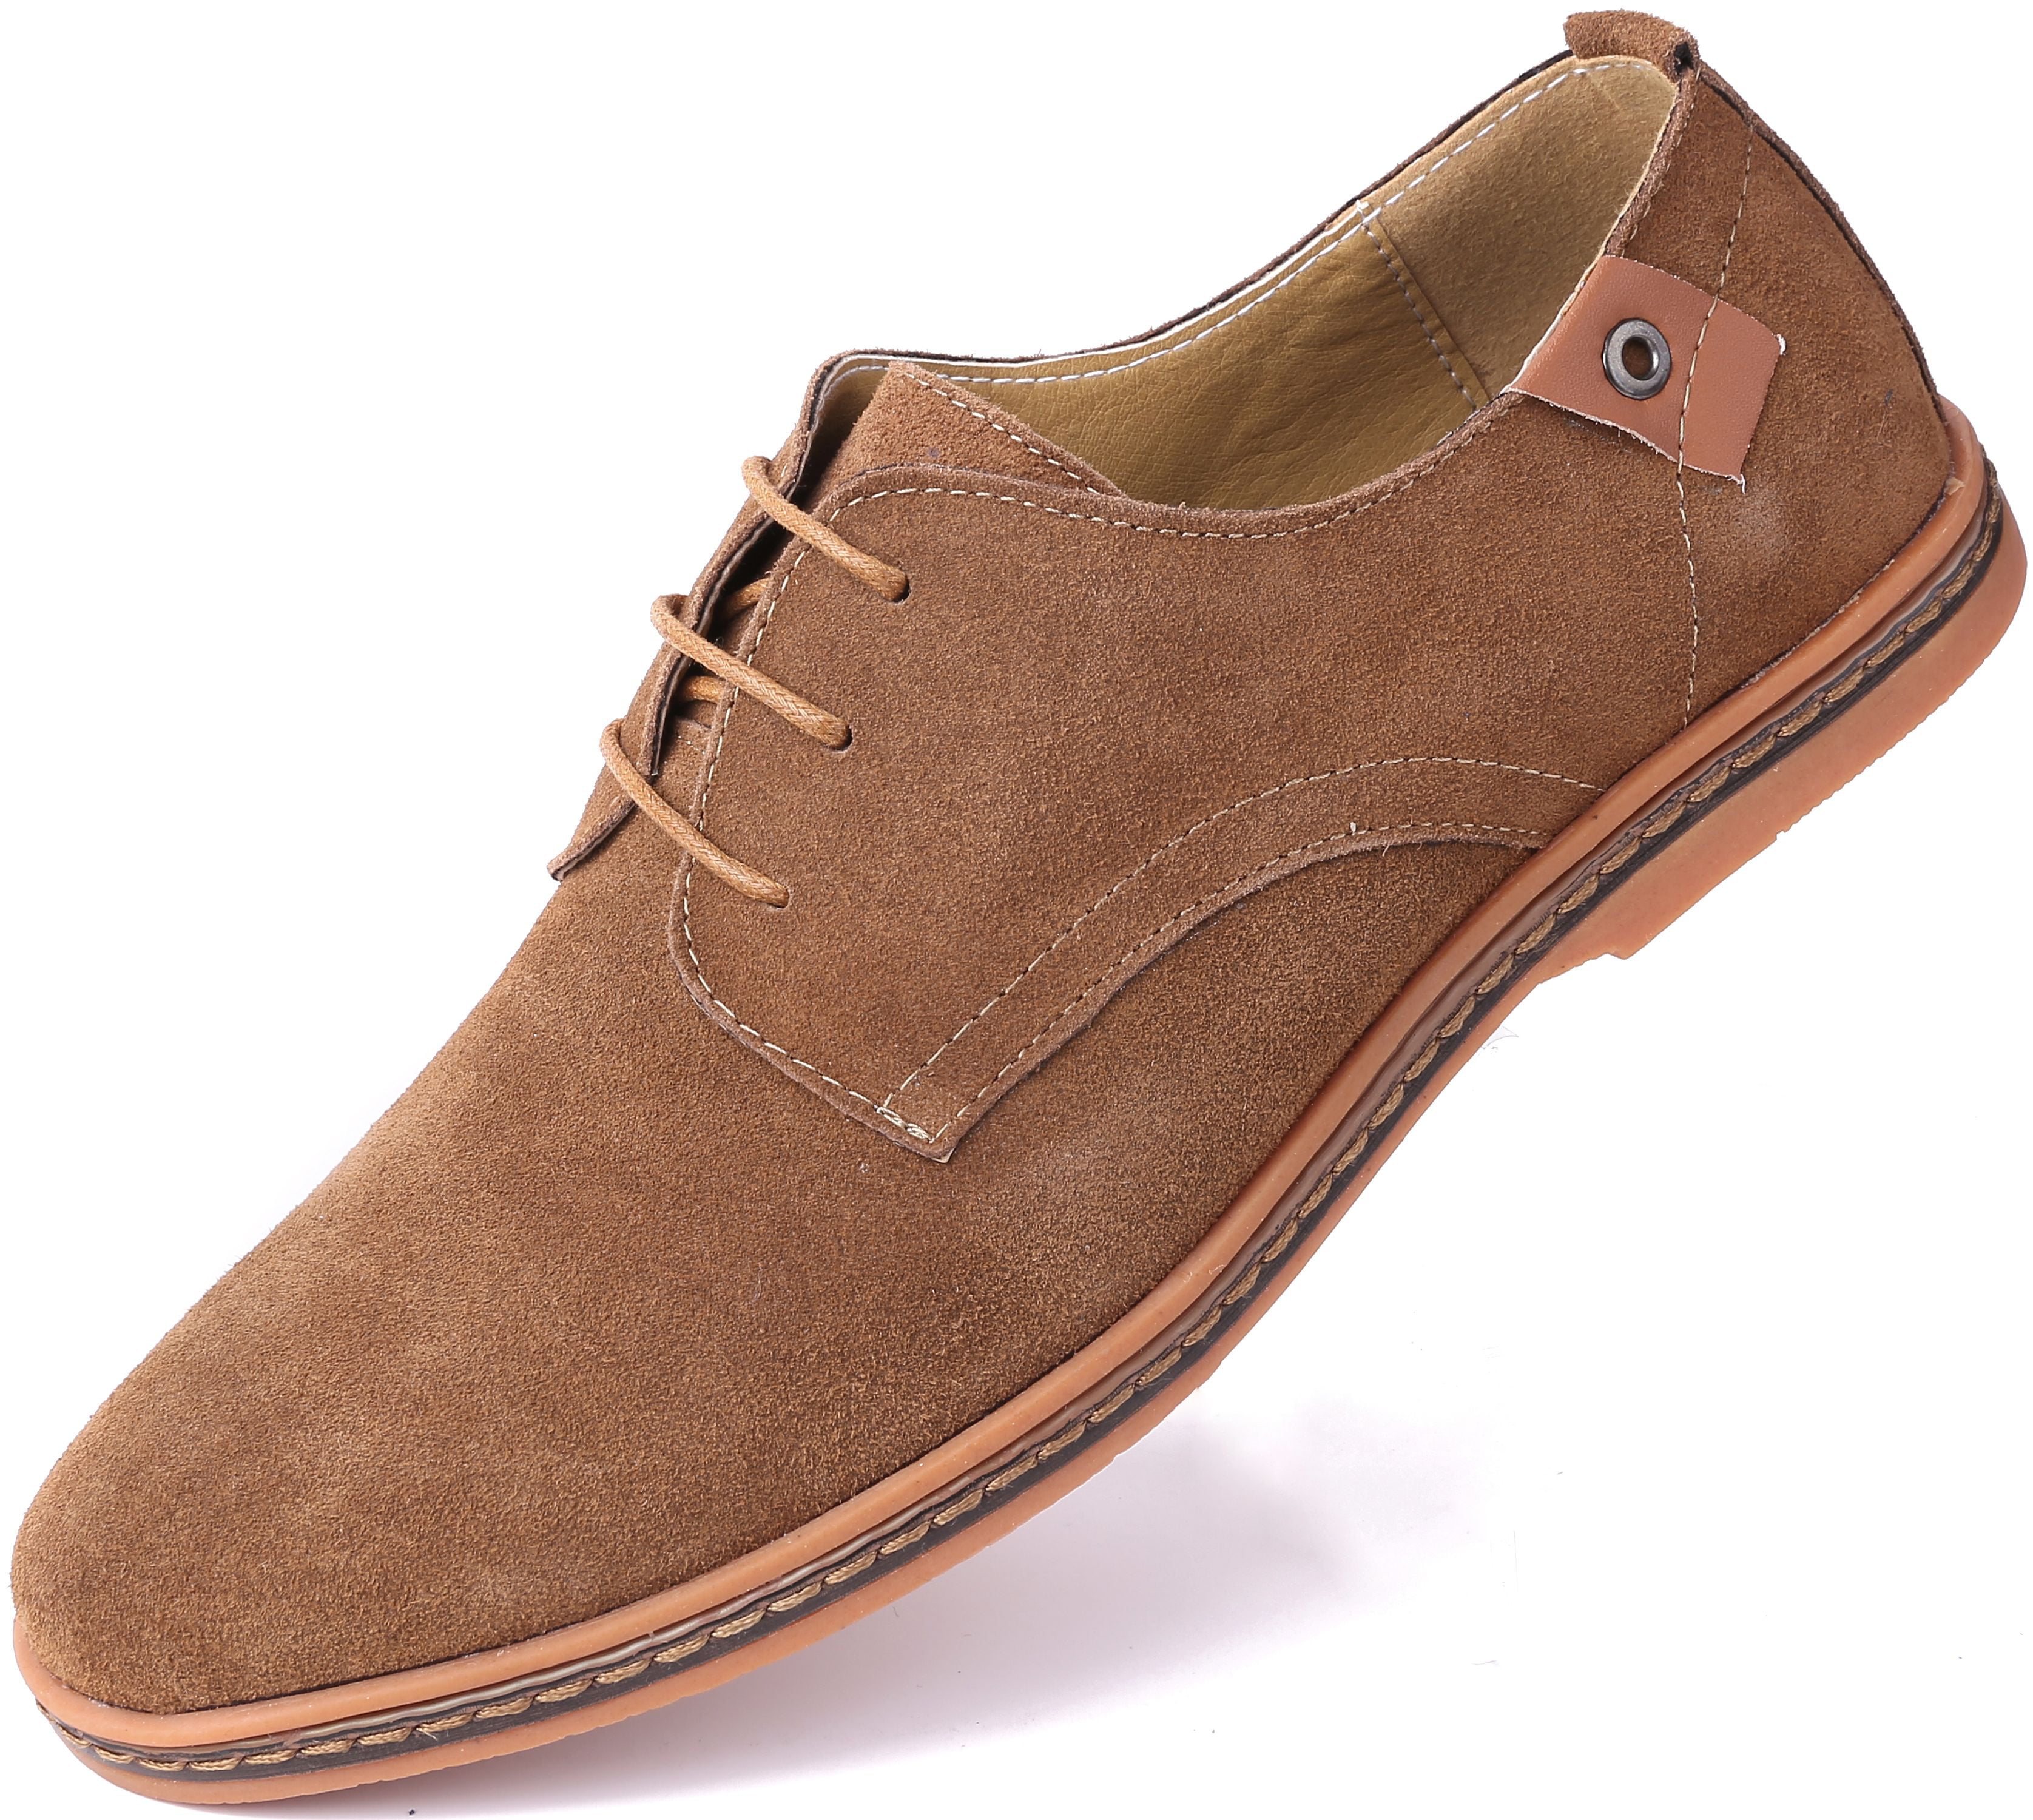 light brown casual dress shoes